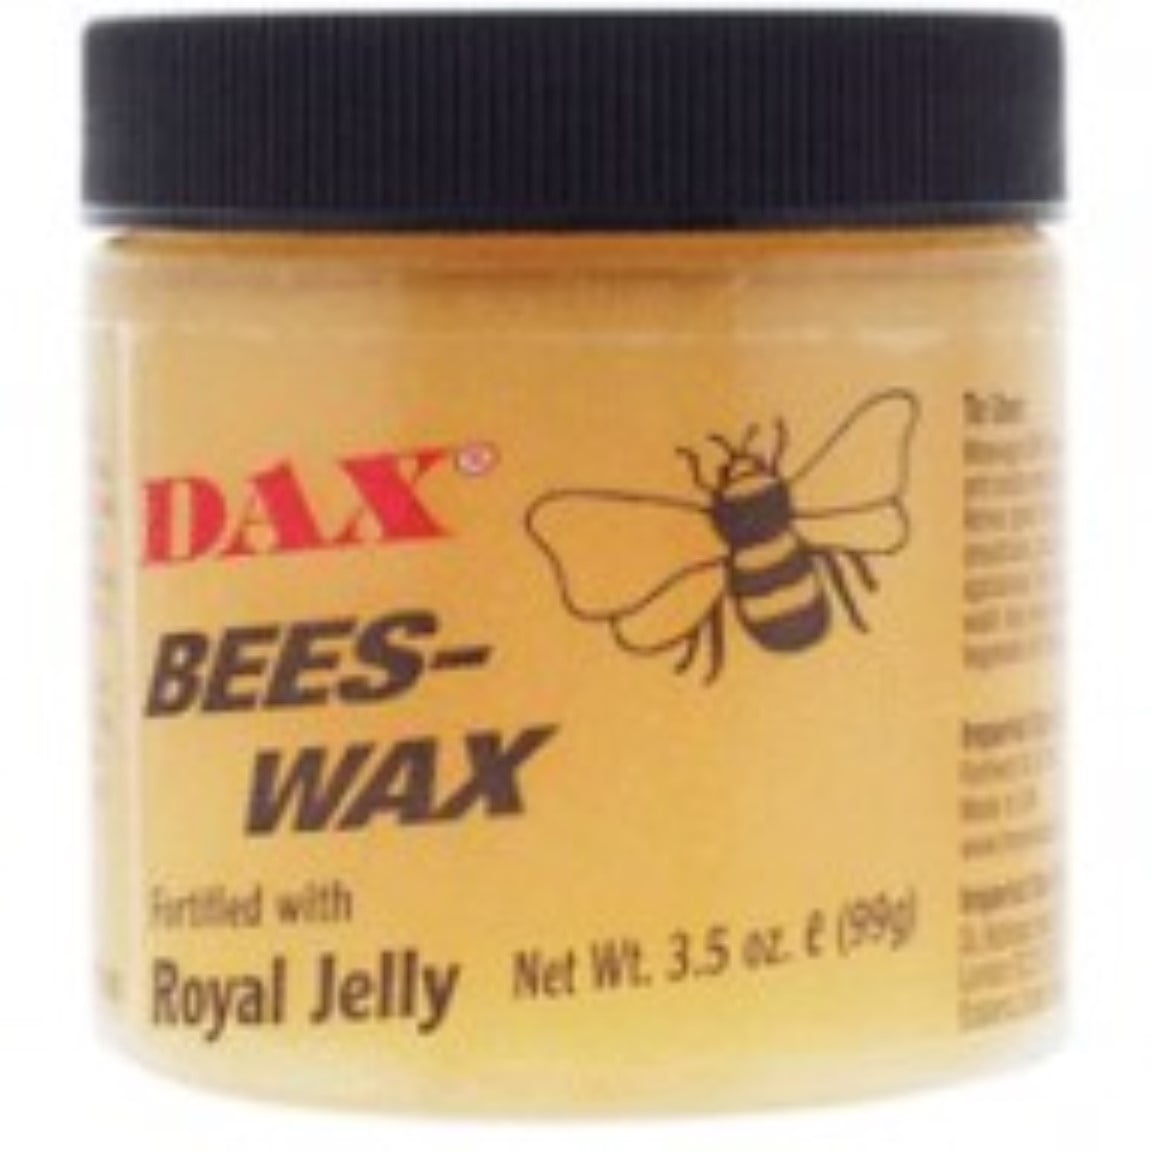 Dax Bees Wax Fortified With Royal Jelly  oz 